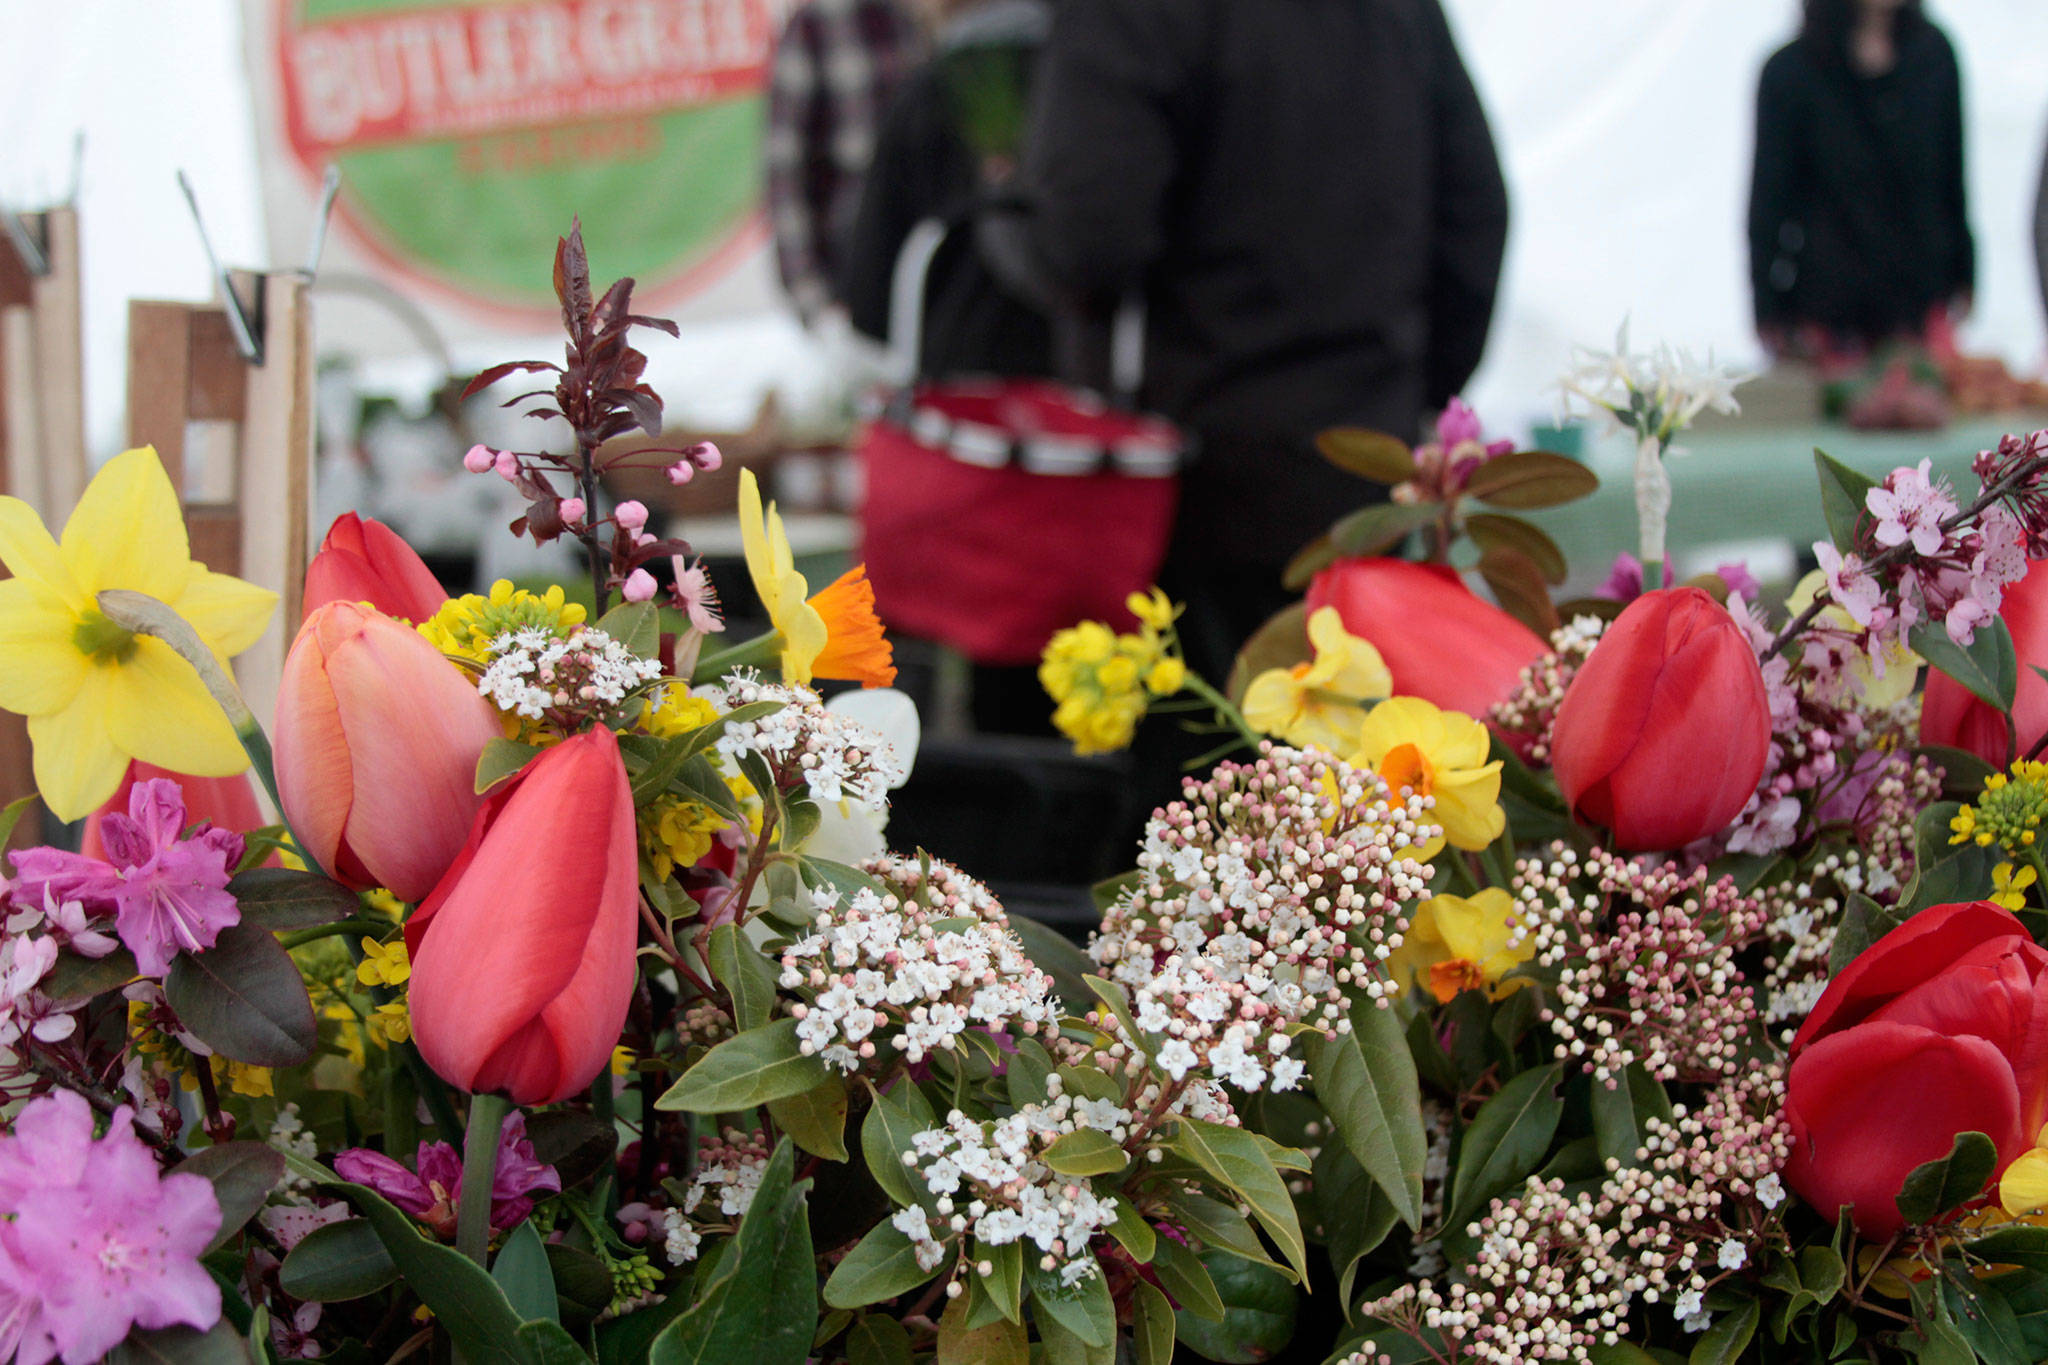 A fresh year for the farmers market | GALLERY